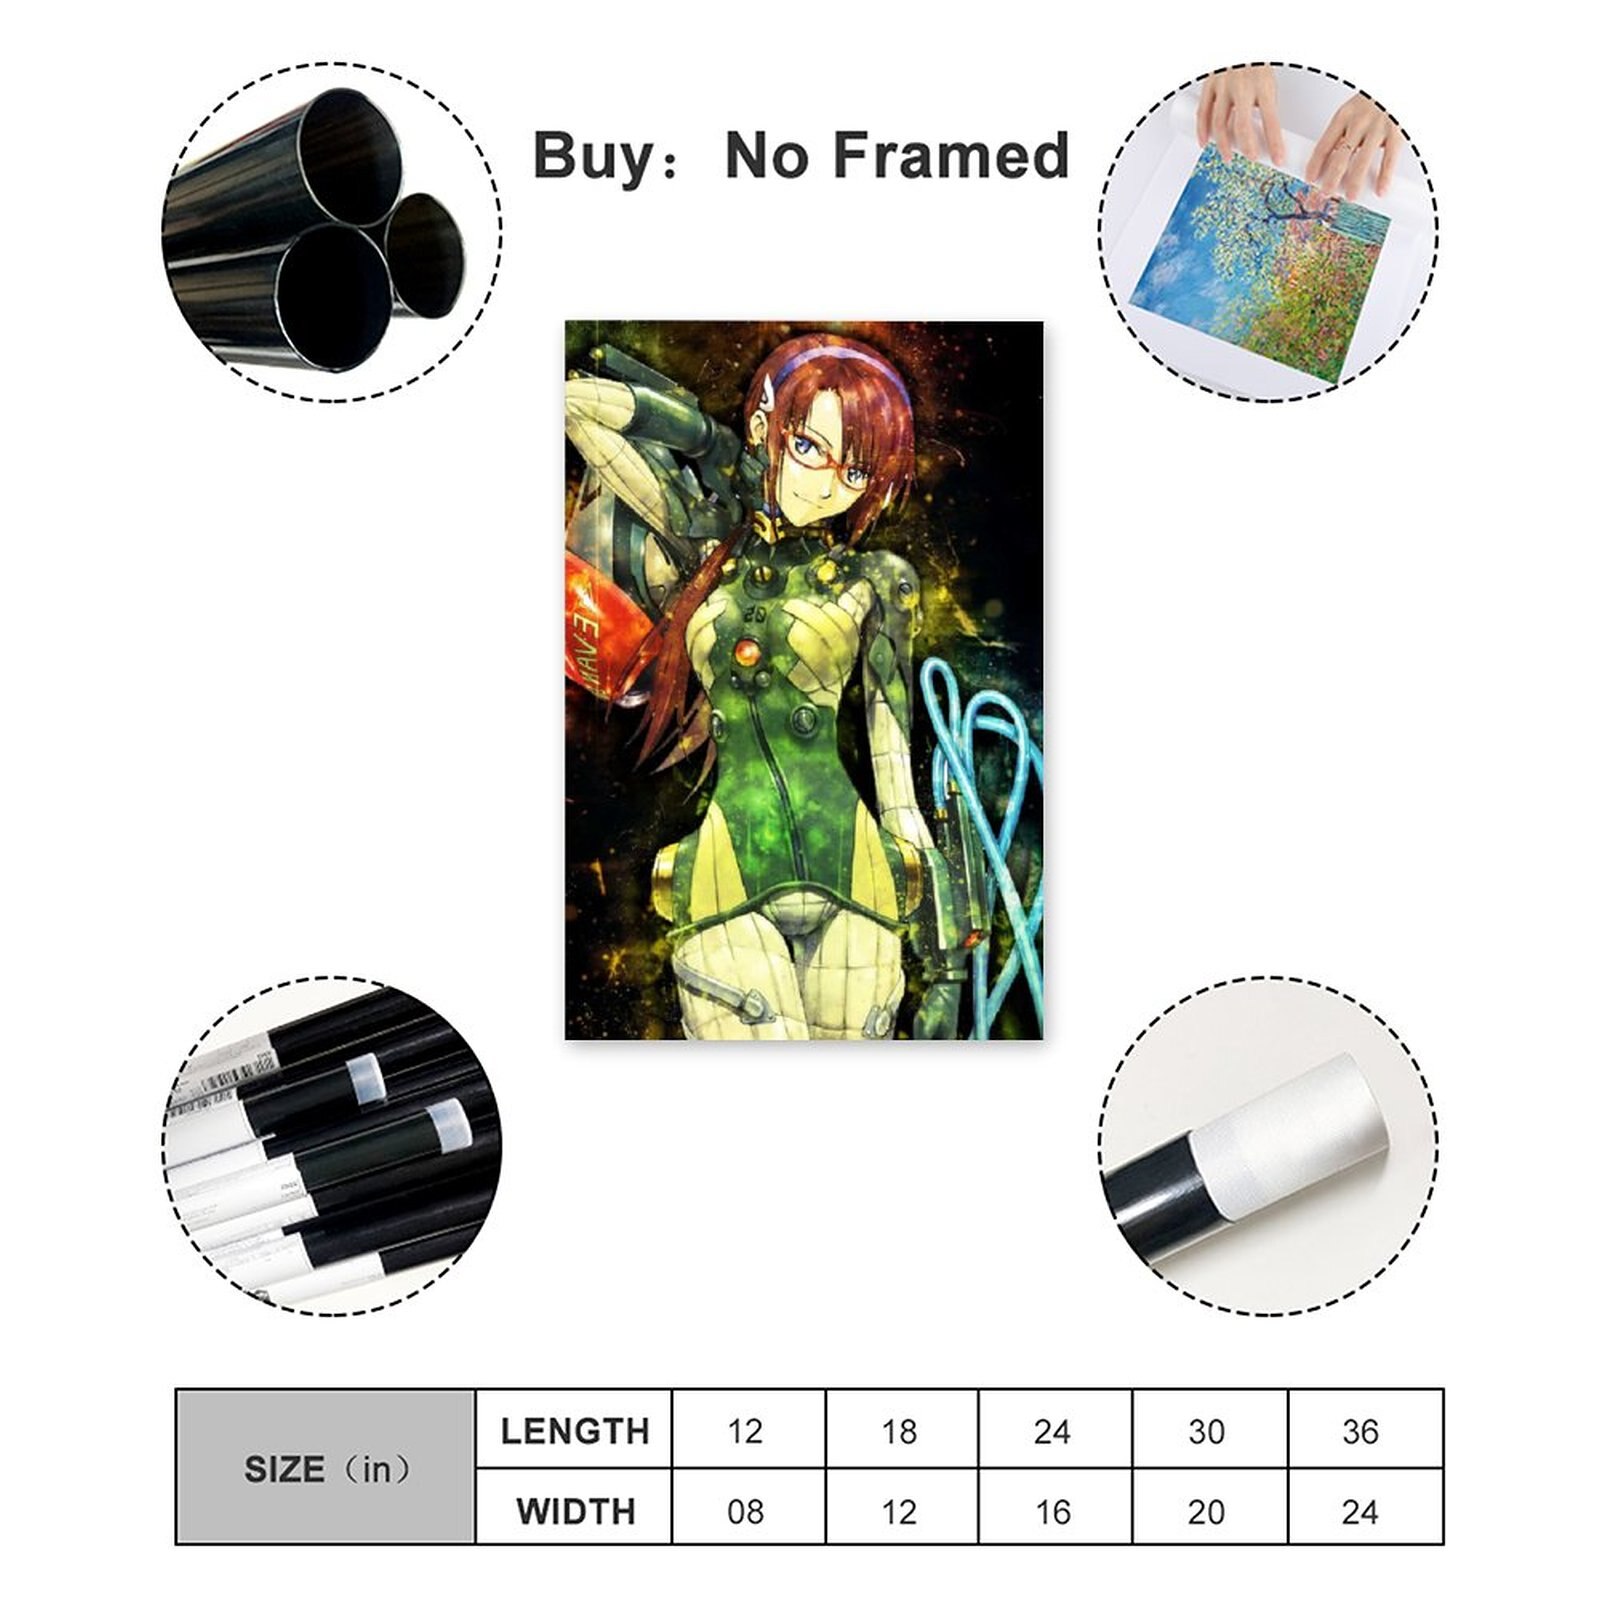 Anime Evangelion Girl MakinamiCanvas Painting Wall Art Posters and Prints Wall Pictures for Living Room Decoration 1 - Evangelion Shop